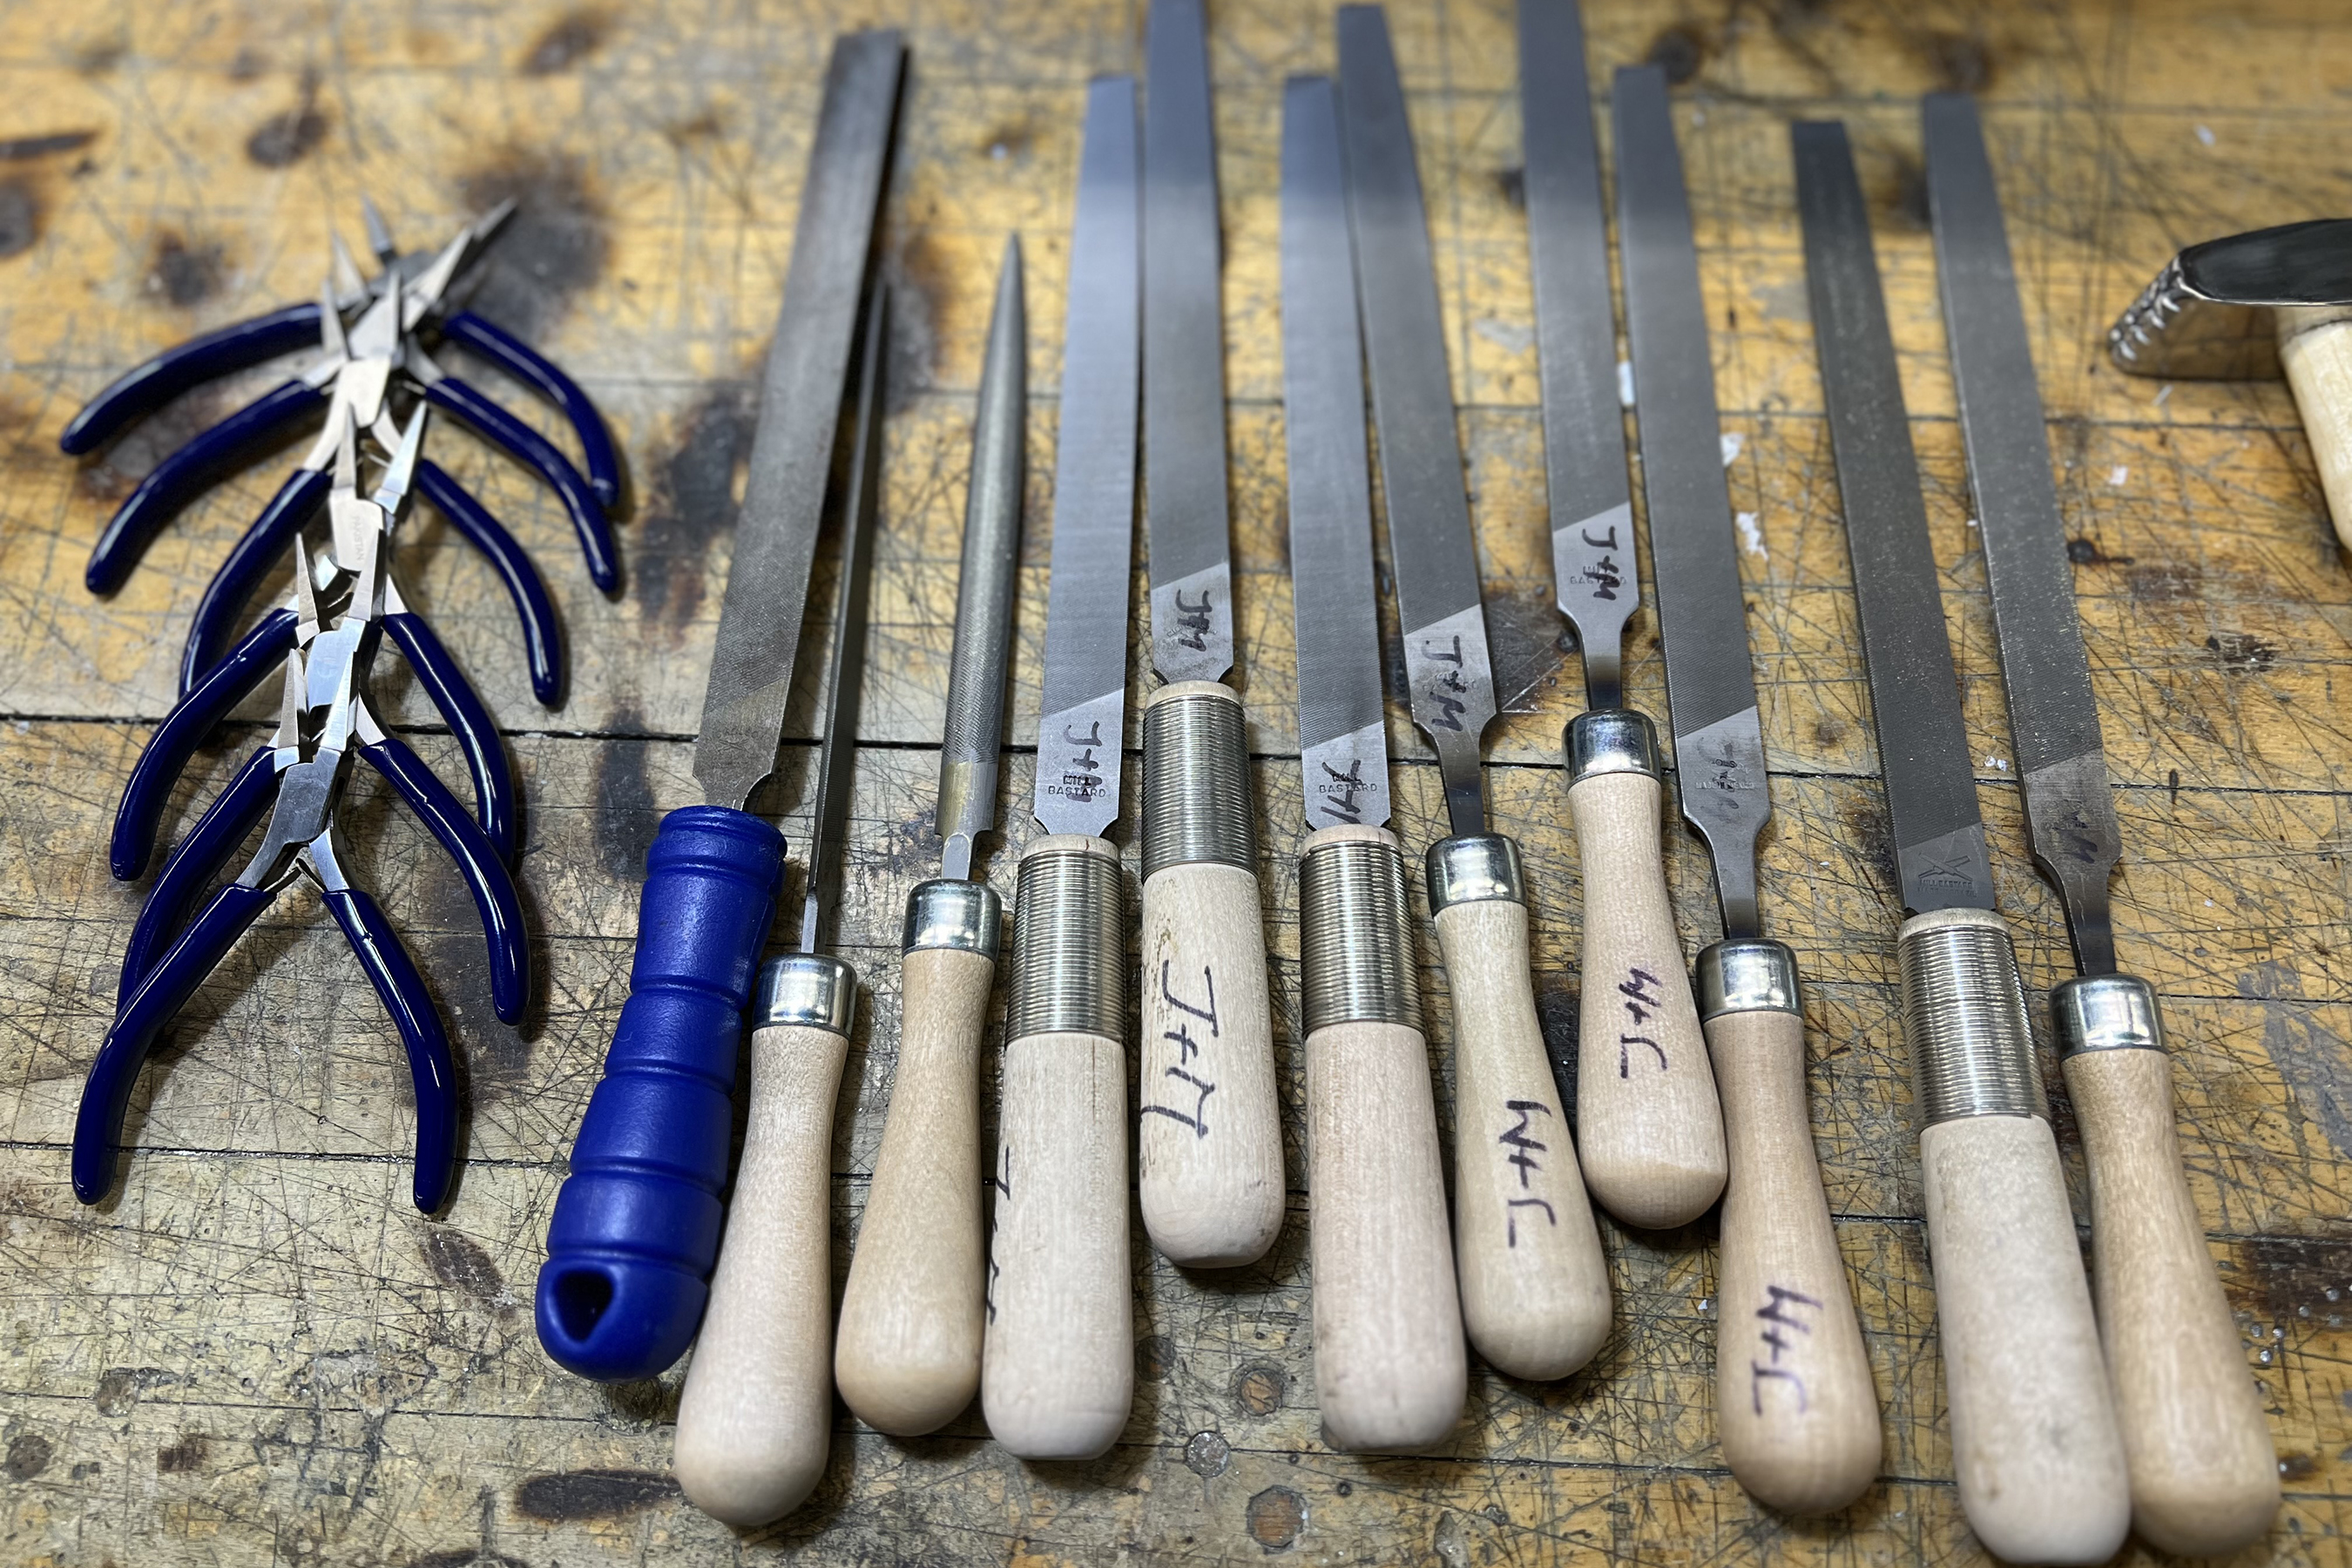 Tools from the J+M studio